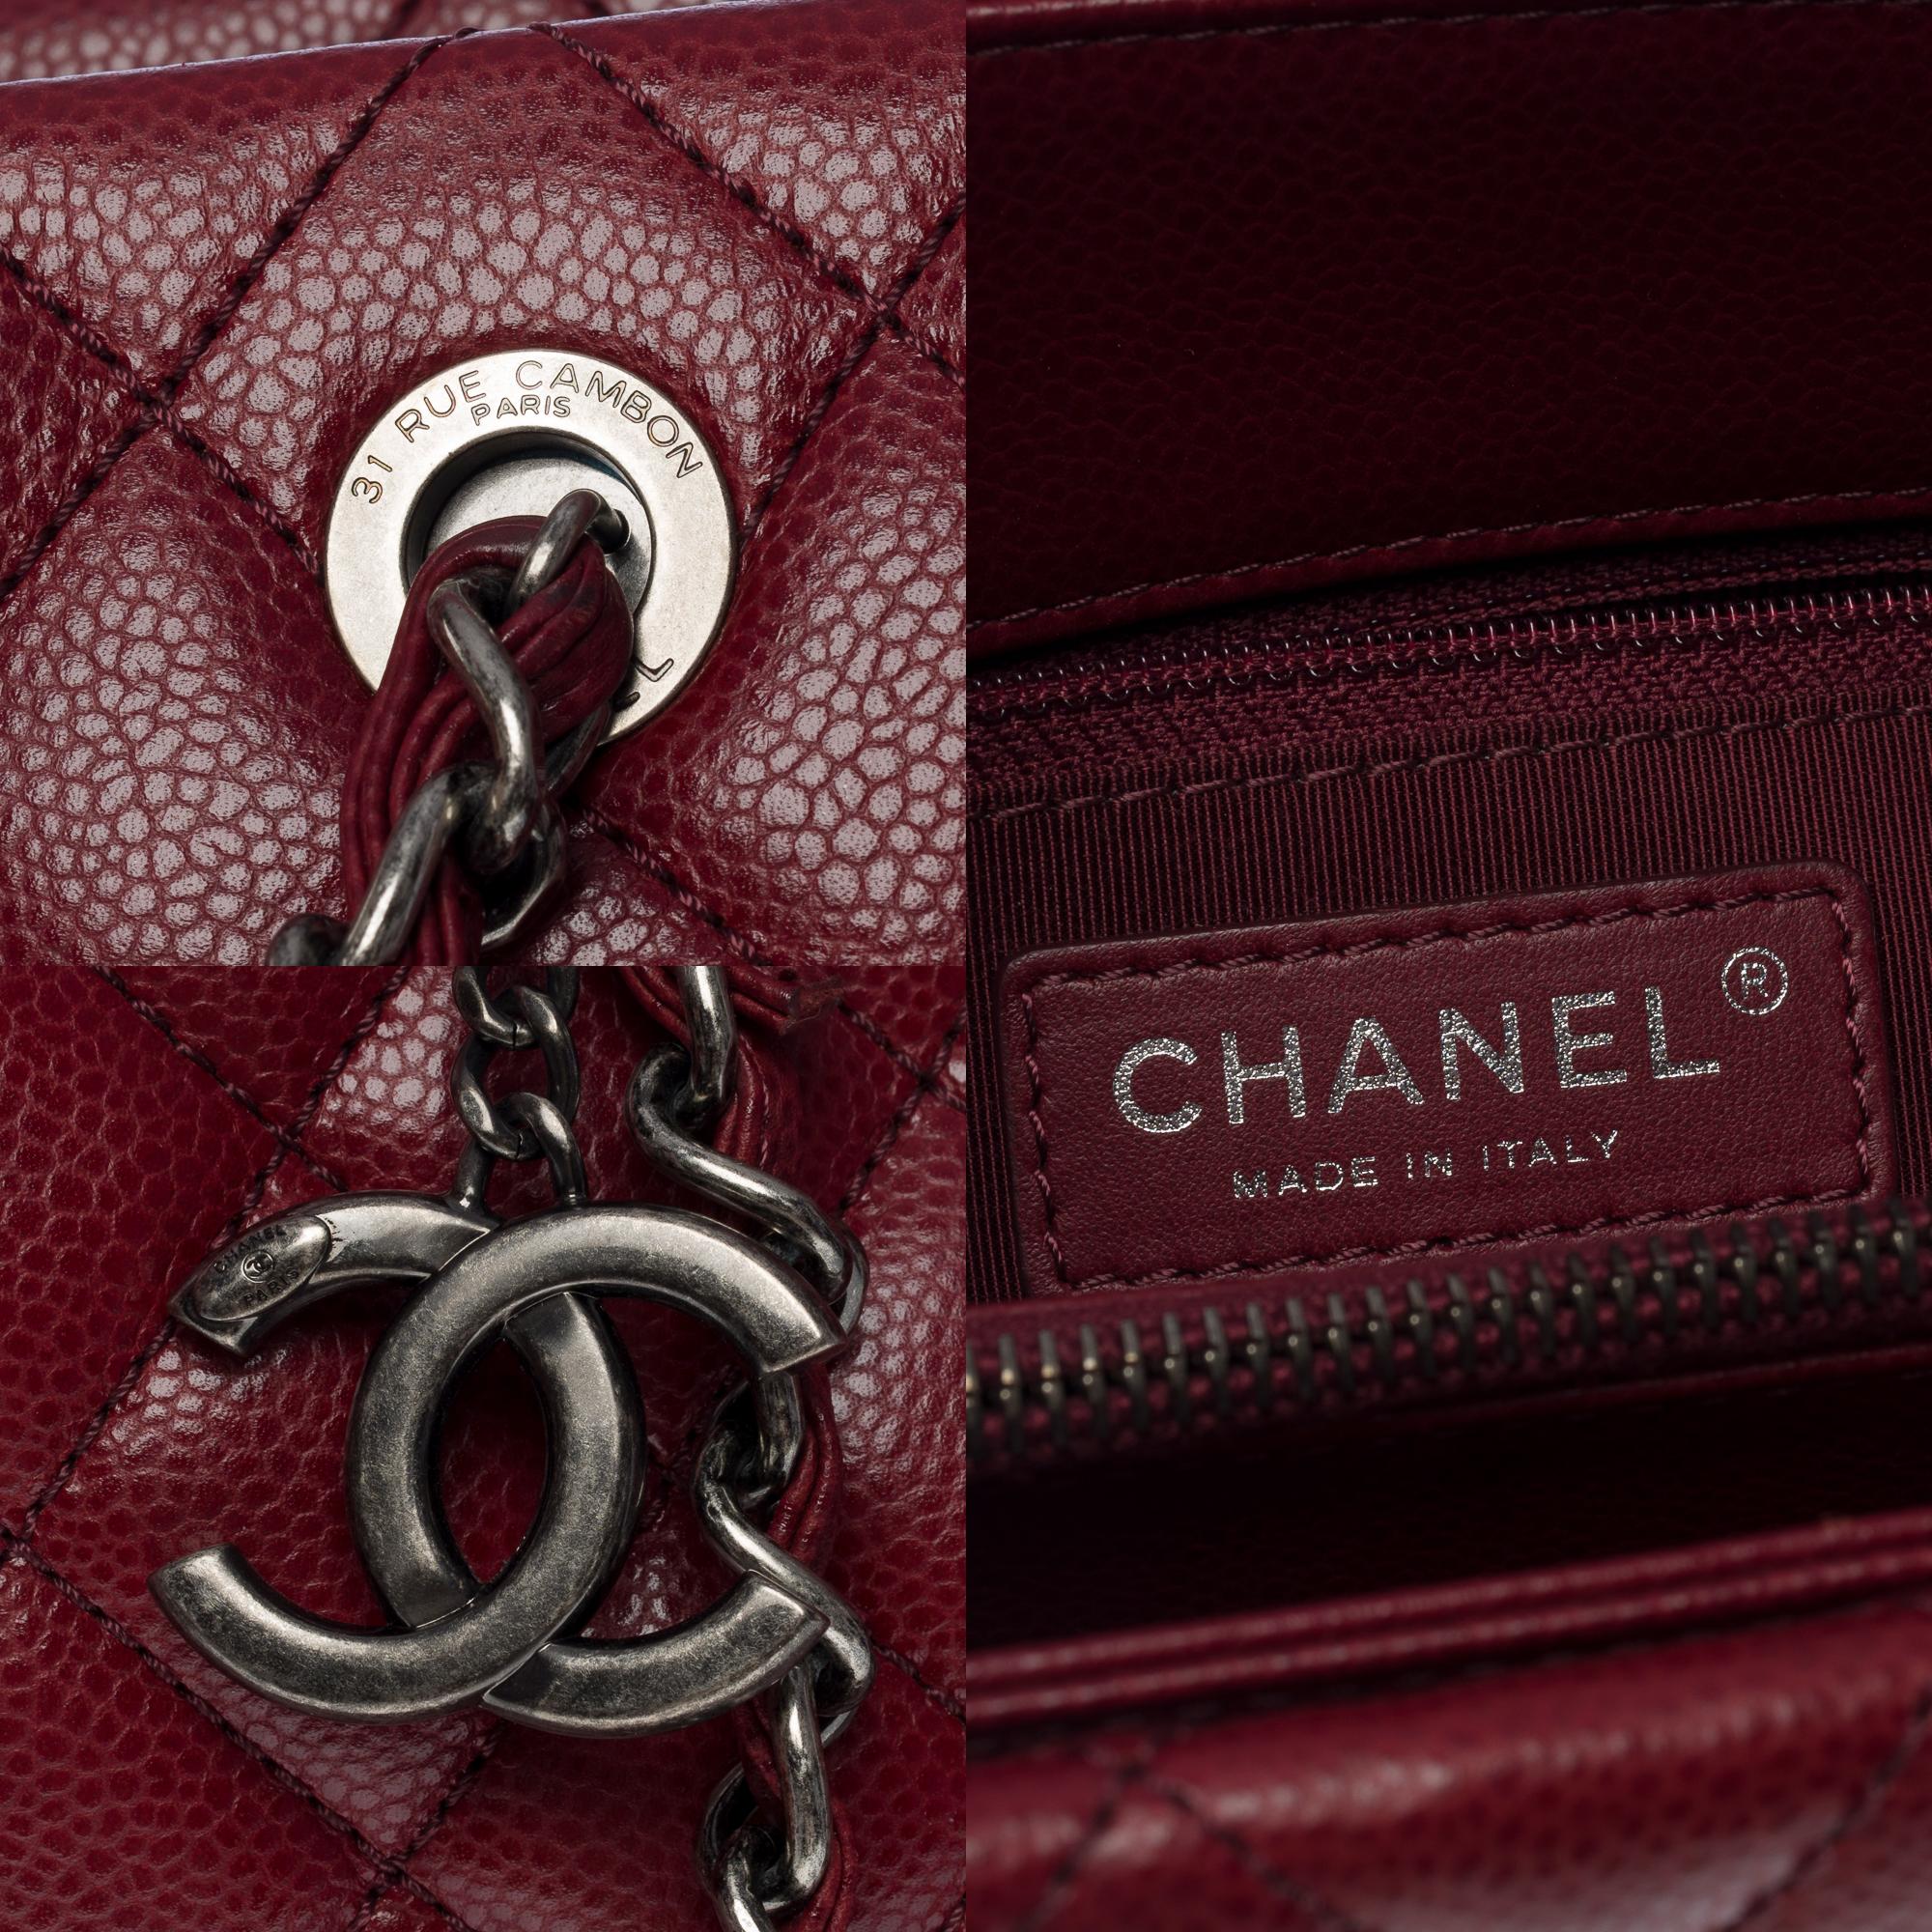 Amazing Chanel Shopping Tote bag in Burgundy Caviar quilted leather, SHW 2